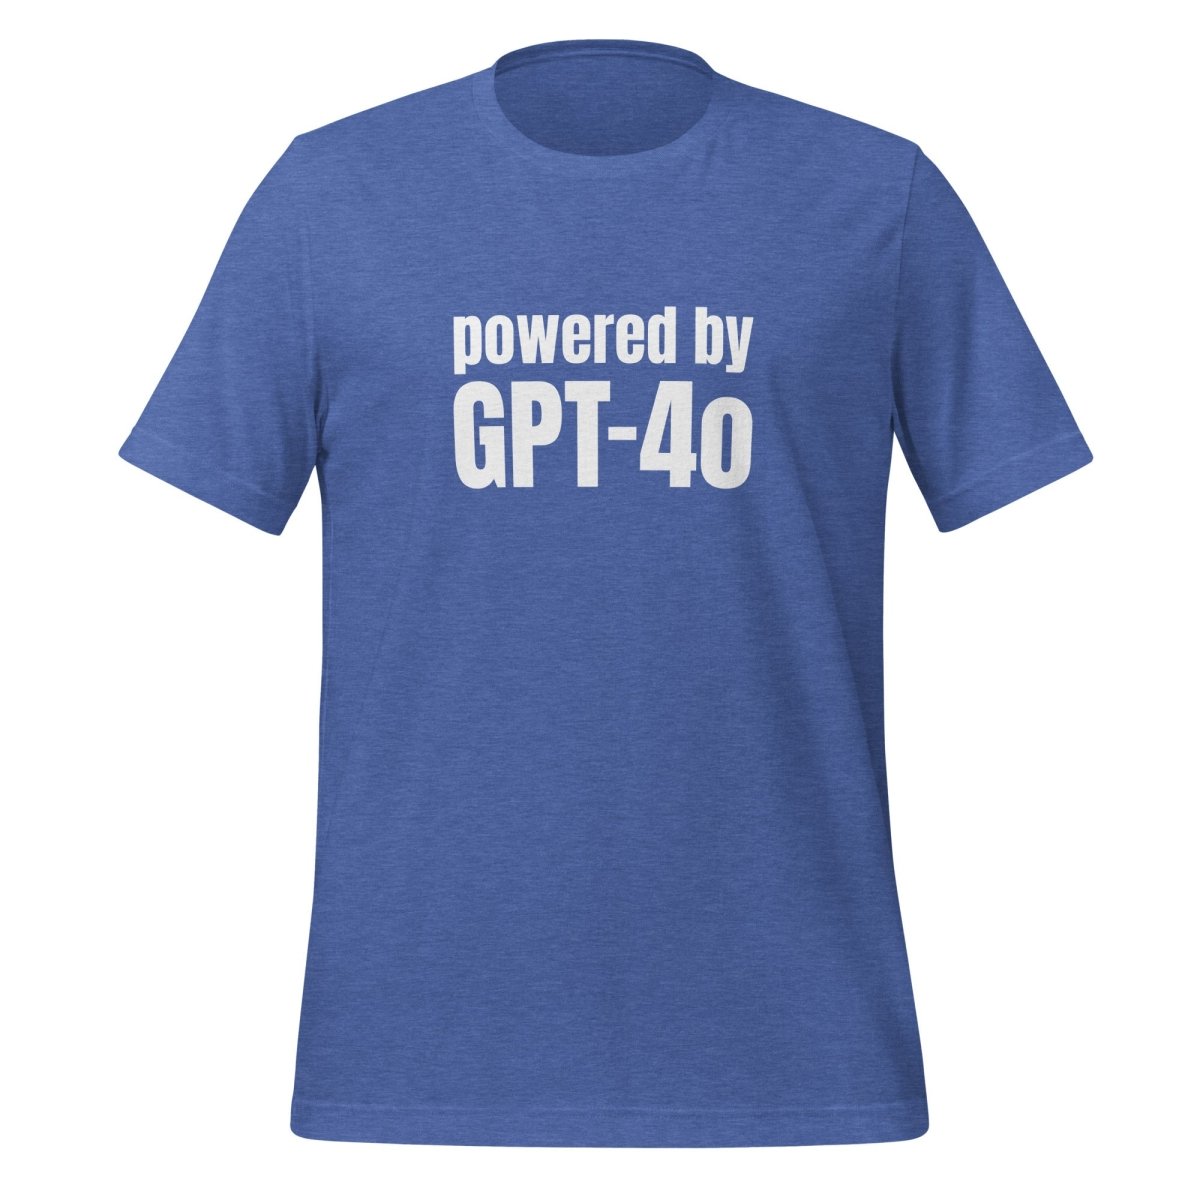 Powered by GPT - 4o T - Shirt (unisex) - Heather True Royal - AI Store